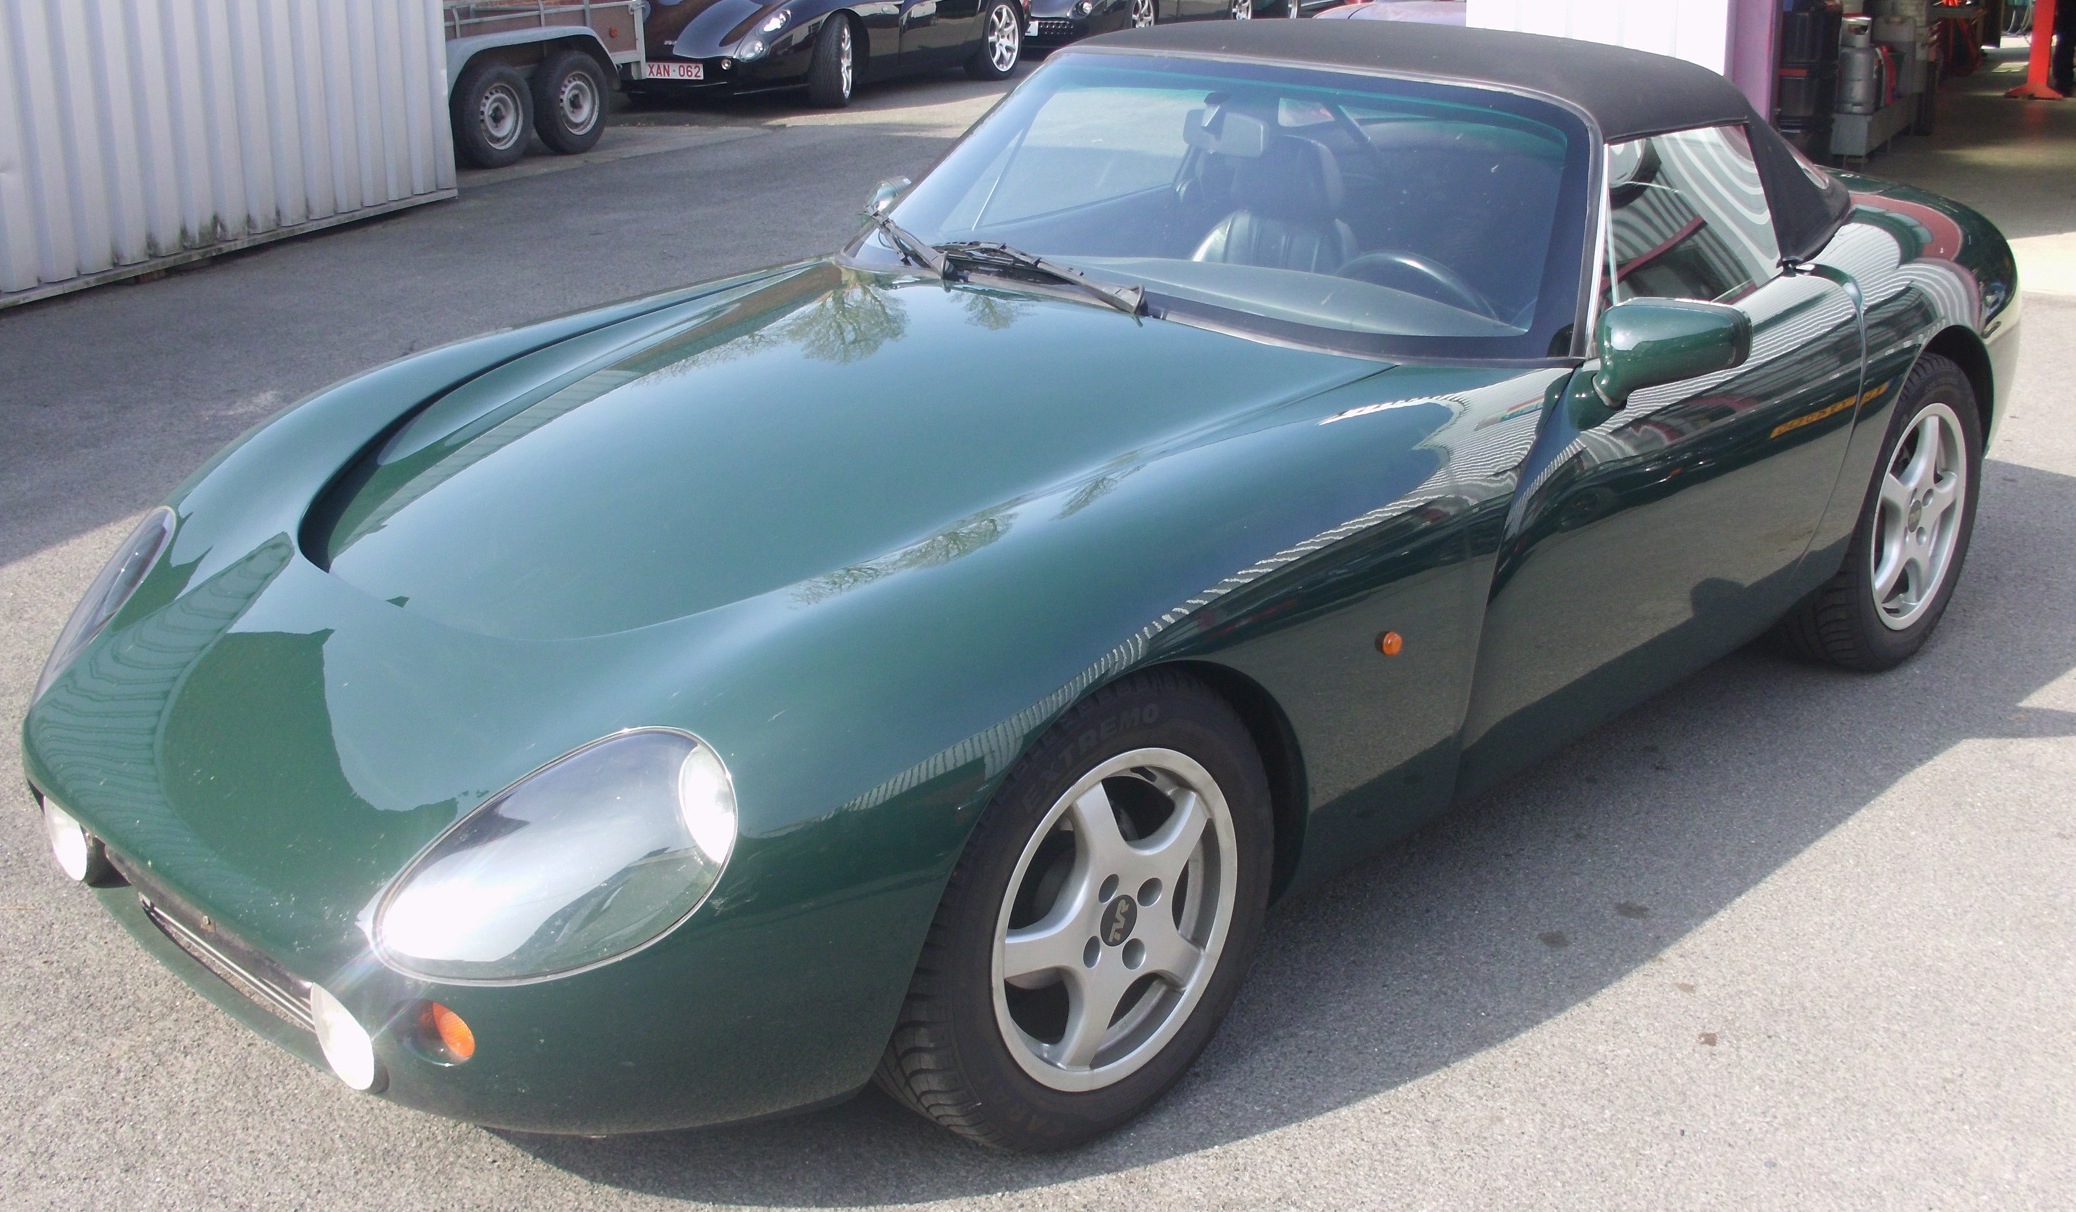 tvr griffith 4.3